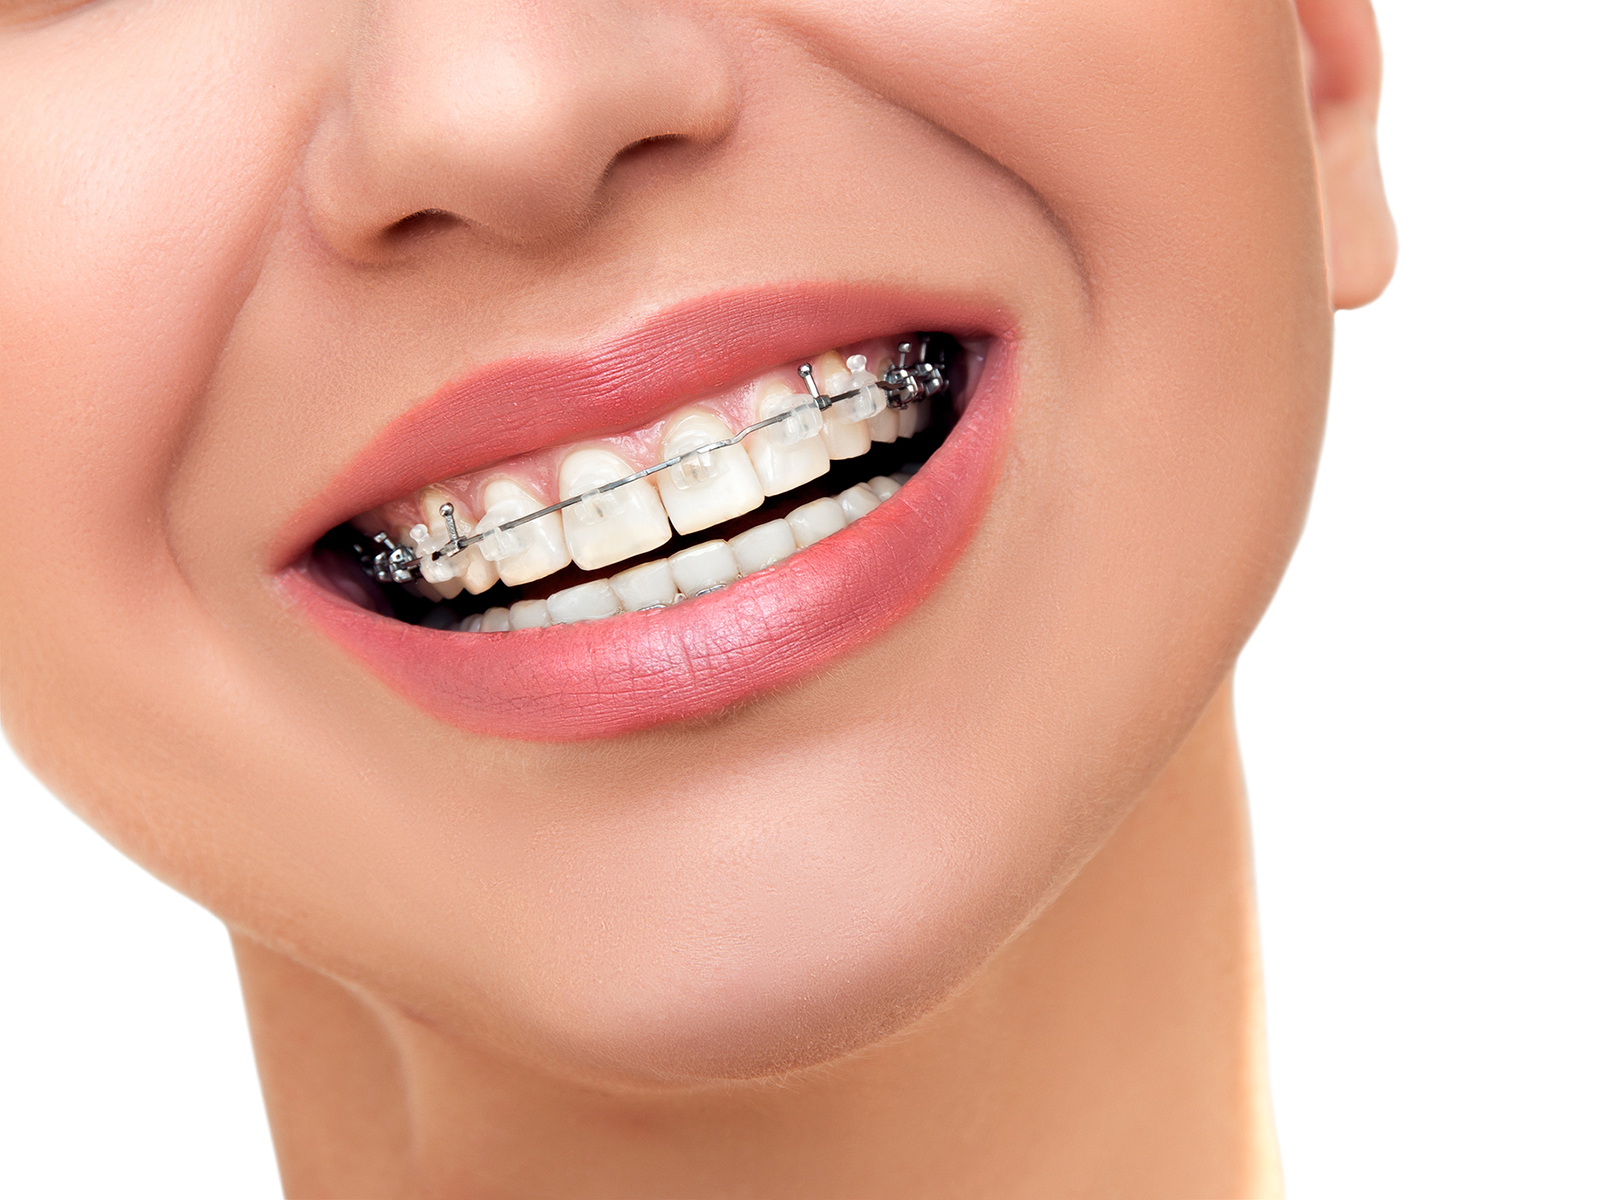 Why are braces tightened every 6 weeks?